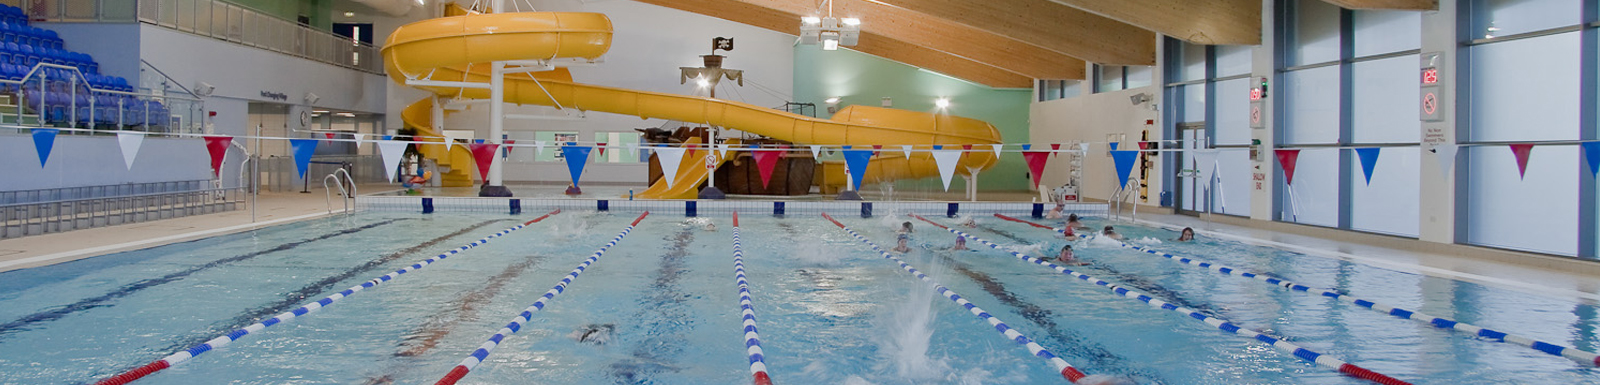 Swimming Pool, Meridian Leisure Centre, Louth, Lincolnshire